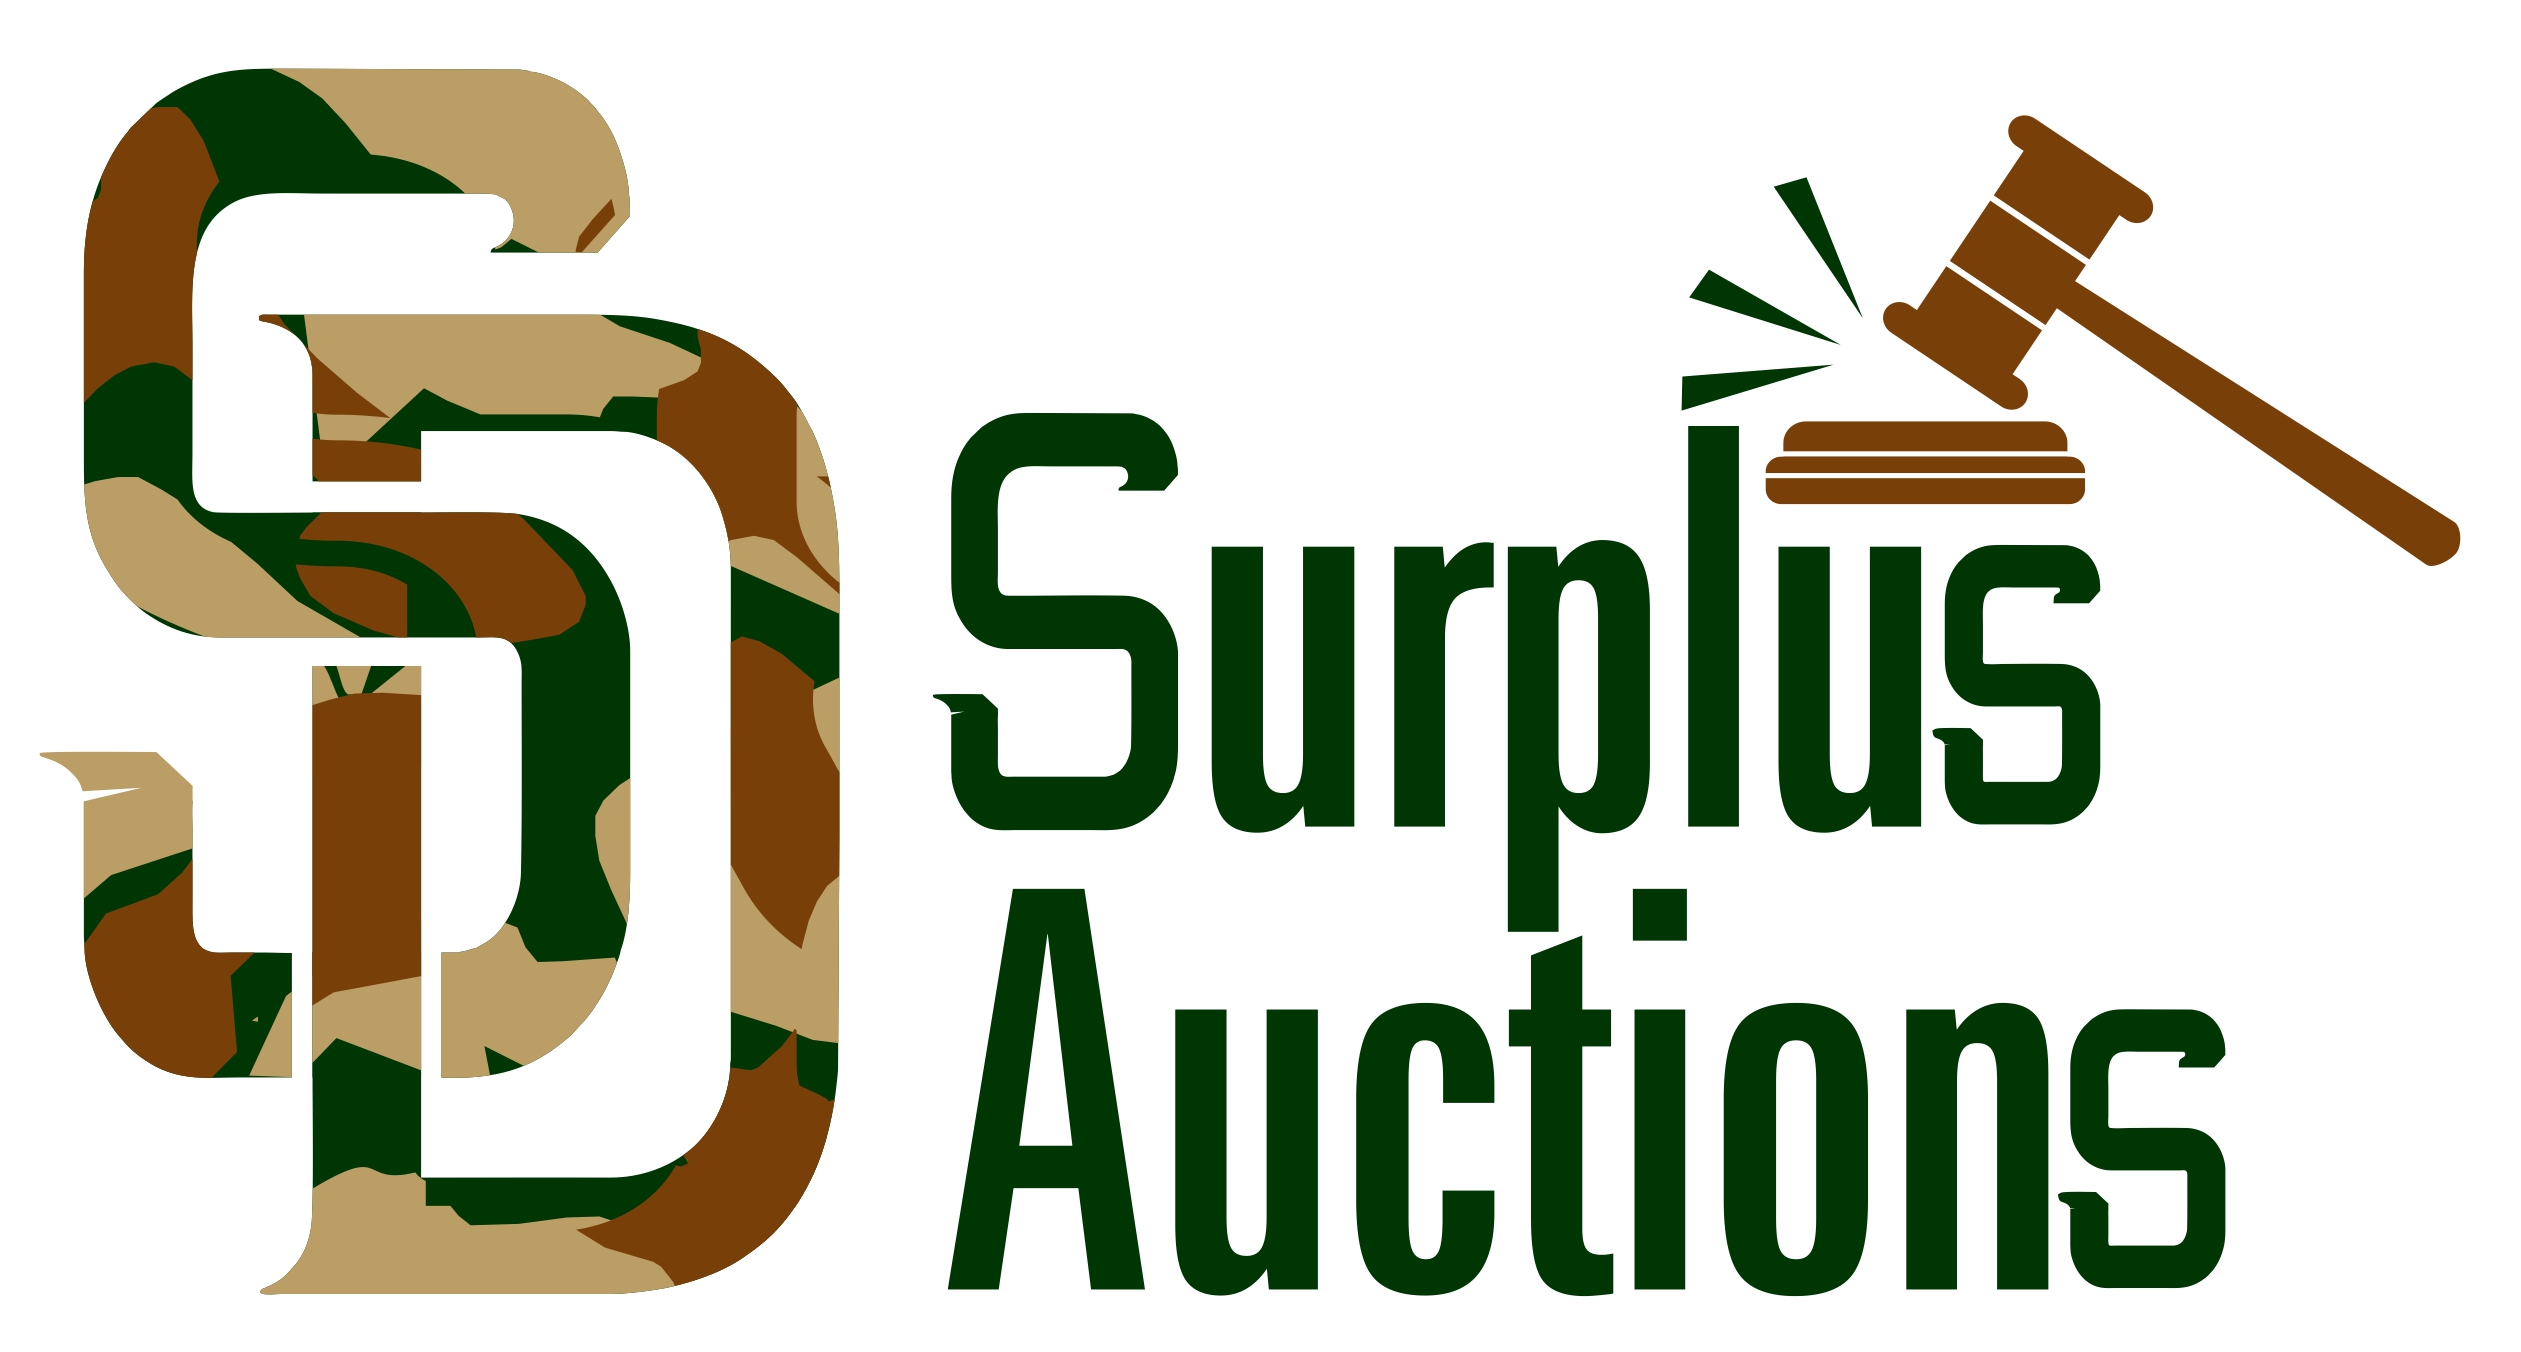 SD Surplus Auctions powered by Proxibid